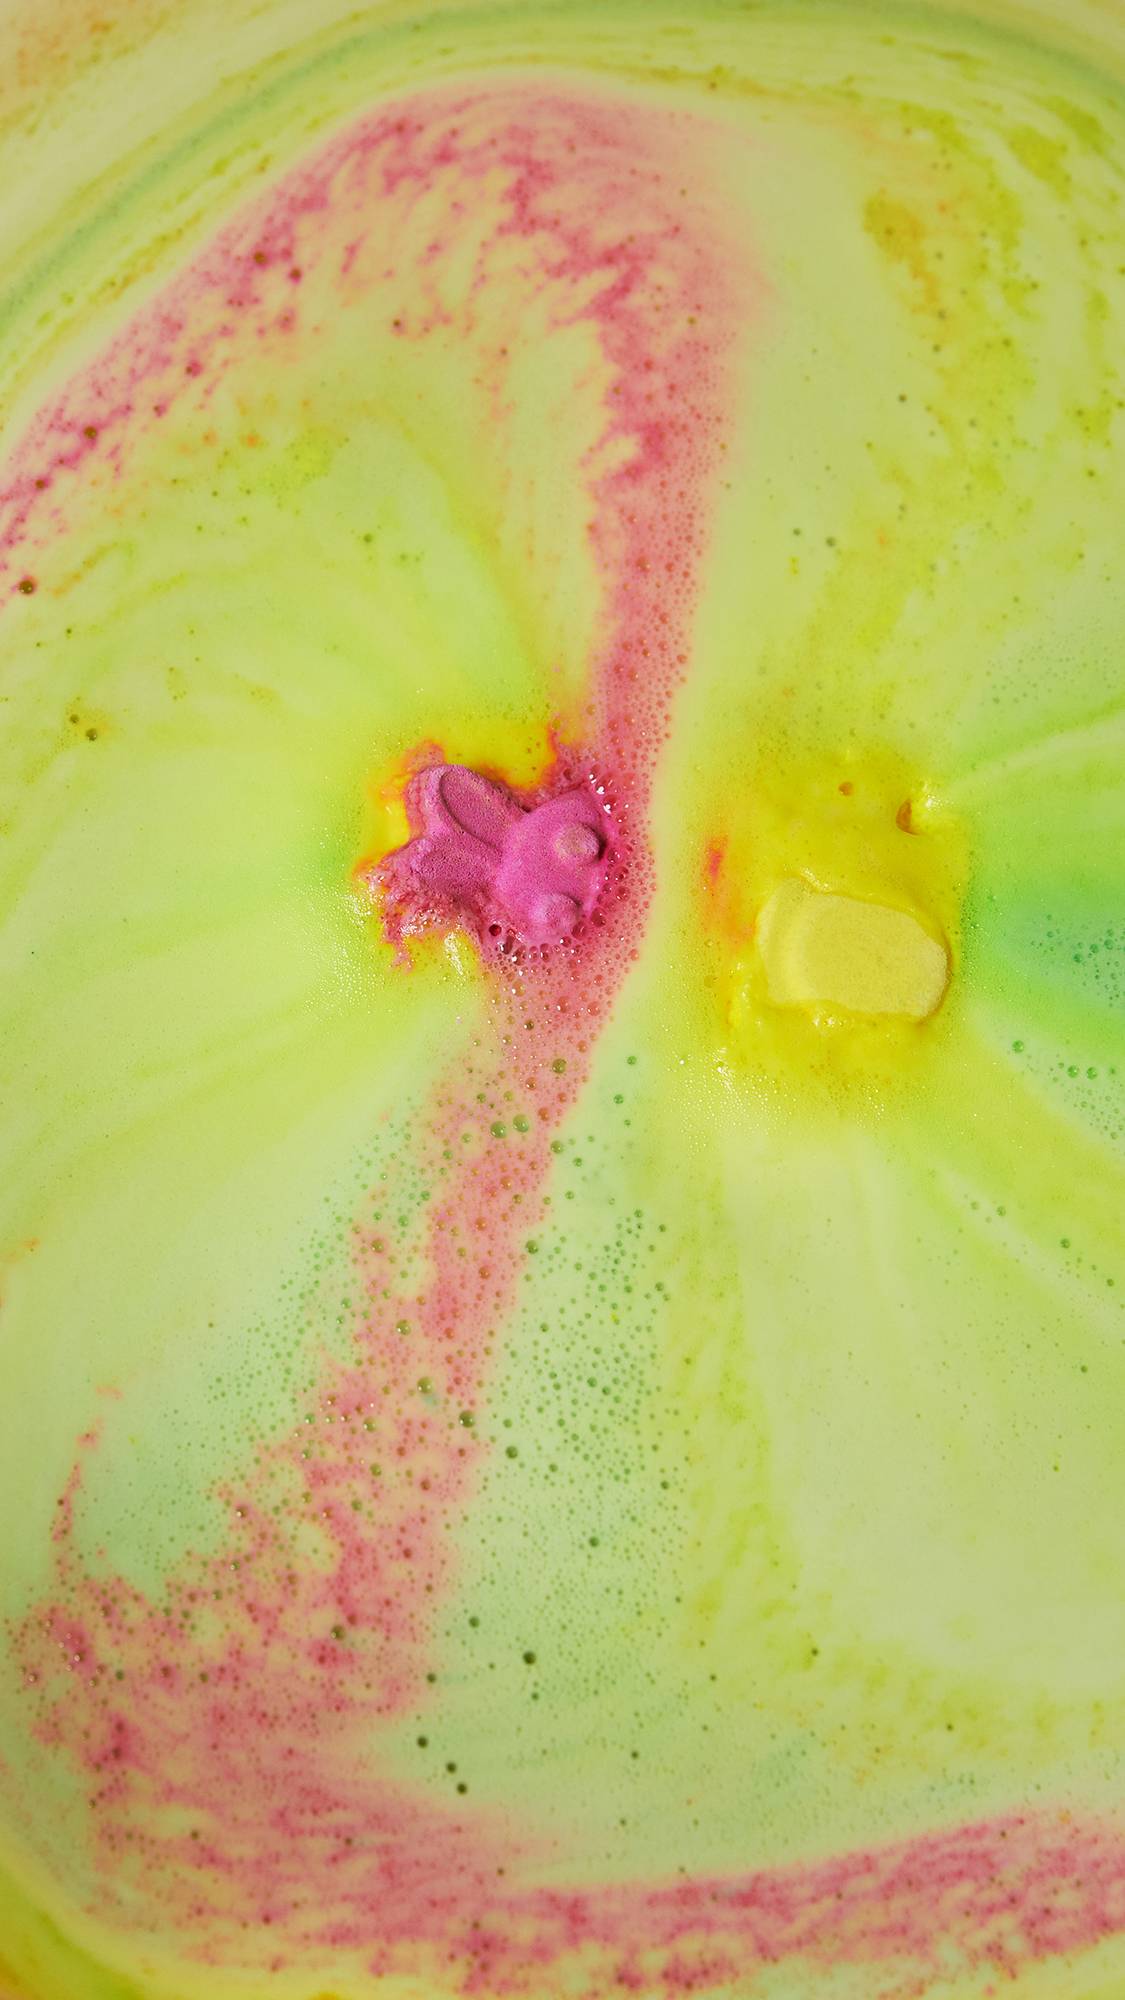  The bath bomb has mostly dissolved leaving a sea of velvety pink, yellow and green foam. Part of the pink bunny face is still visible through the foam.